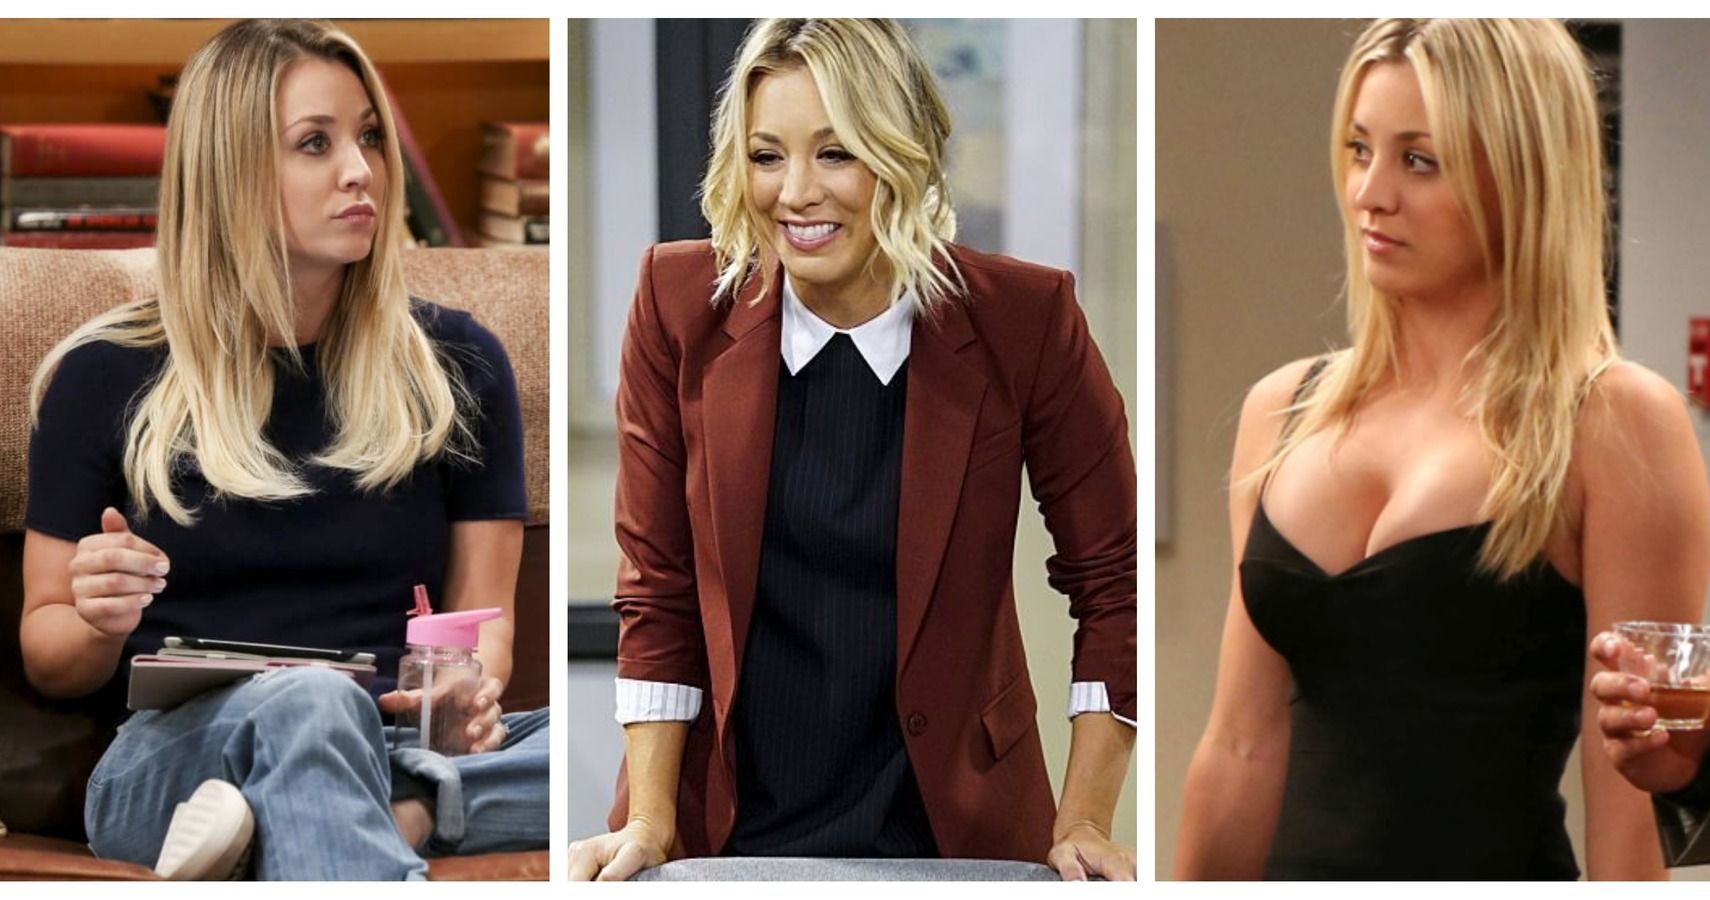 The Big Bang Theory 10 Styles All Fans Want From Penny S Closet The big bang theory premiere recap: the big bang theory 10 styles all fans